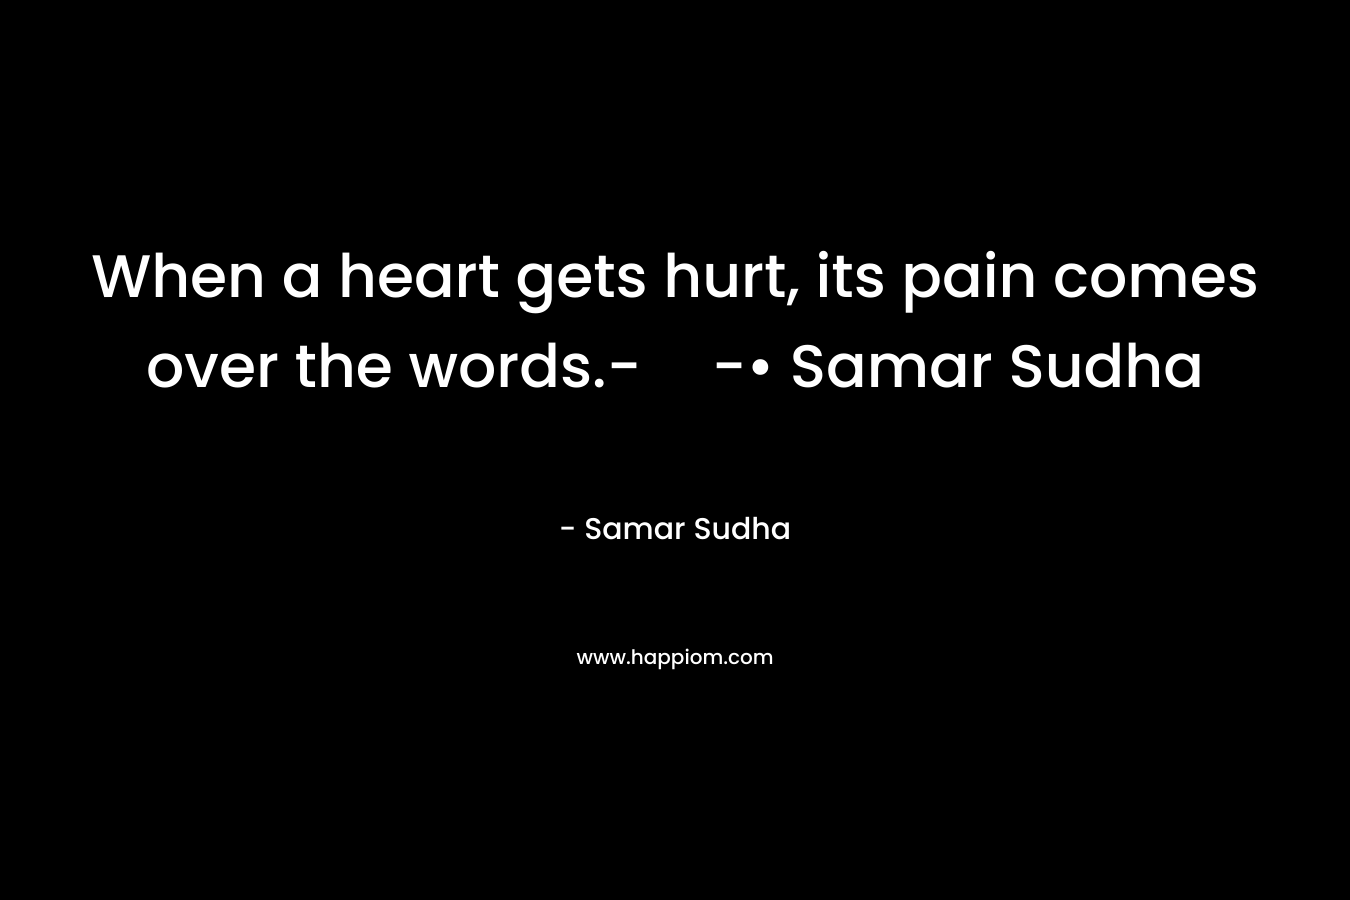 When a heart gets hurt, its pain comes over the words.--• Samar Sudha